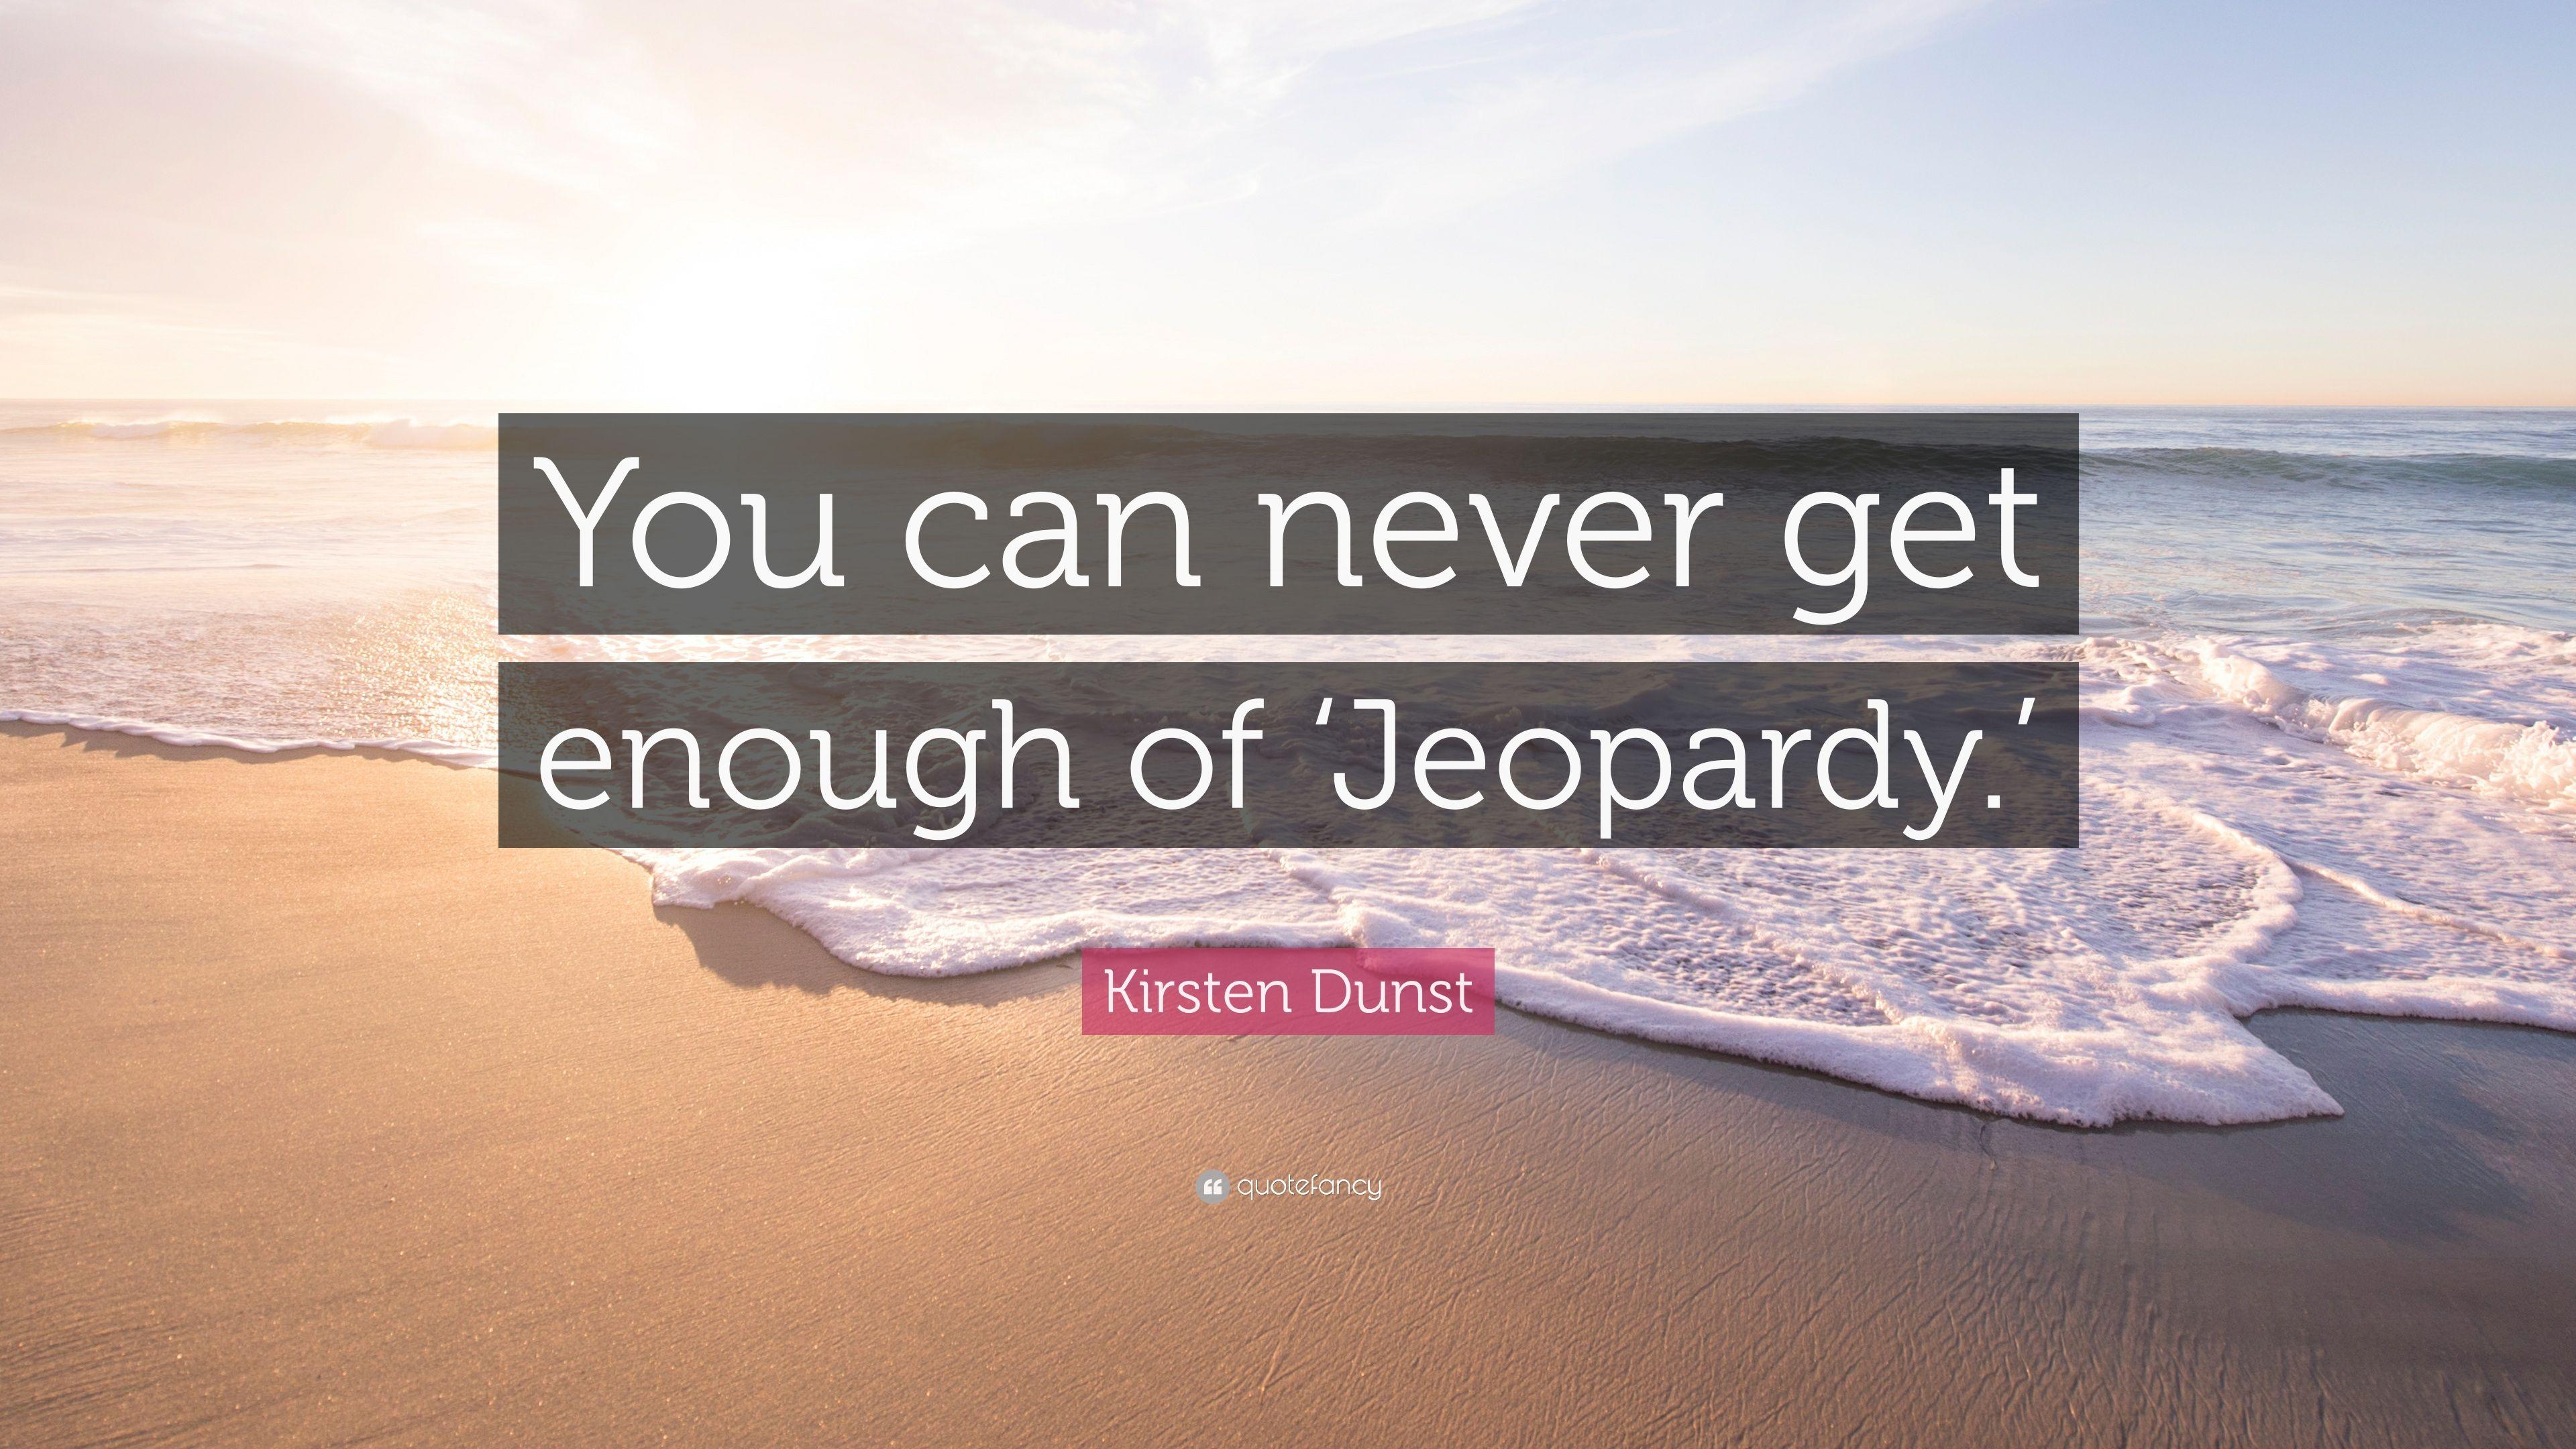 Kirsten Dunst Quote: “You can never get enough of 'Jeopardy.'” 7